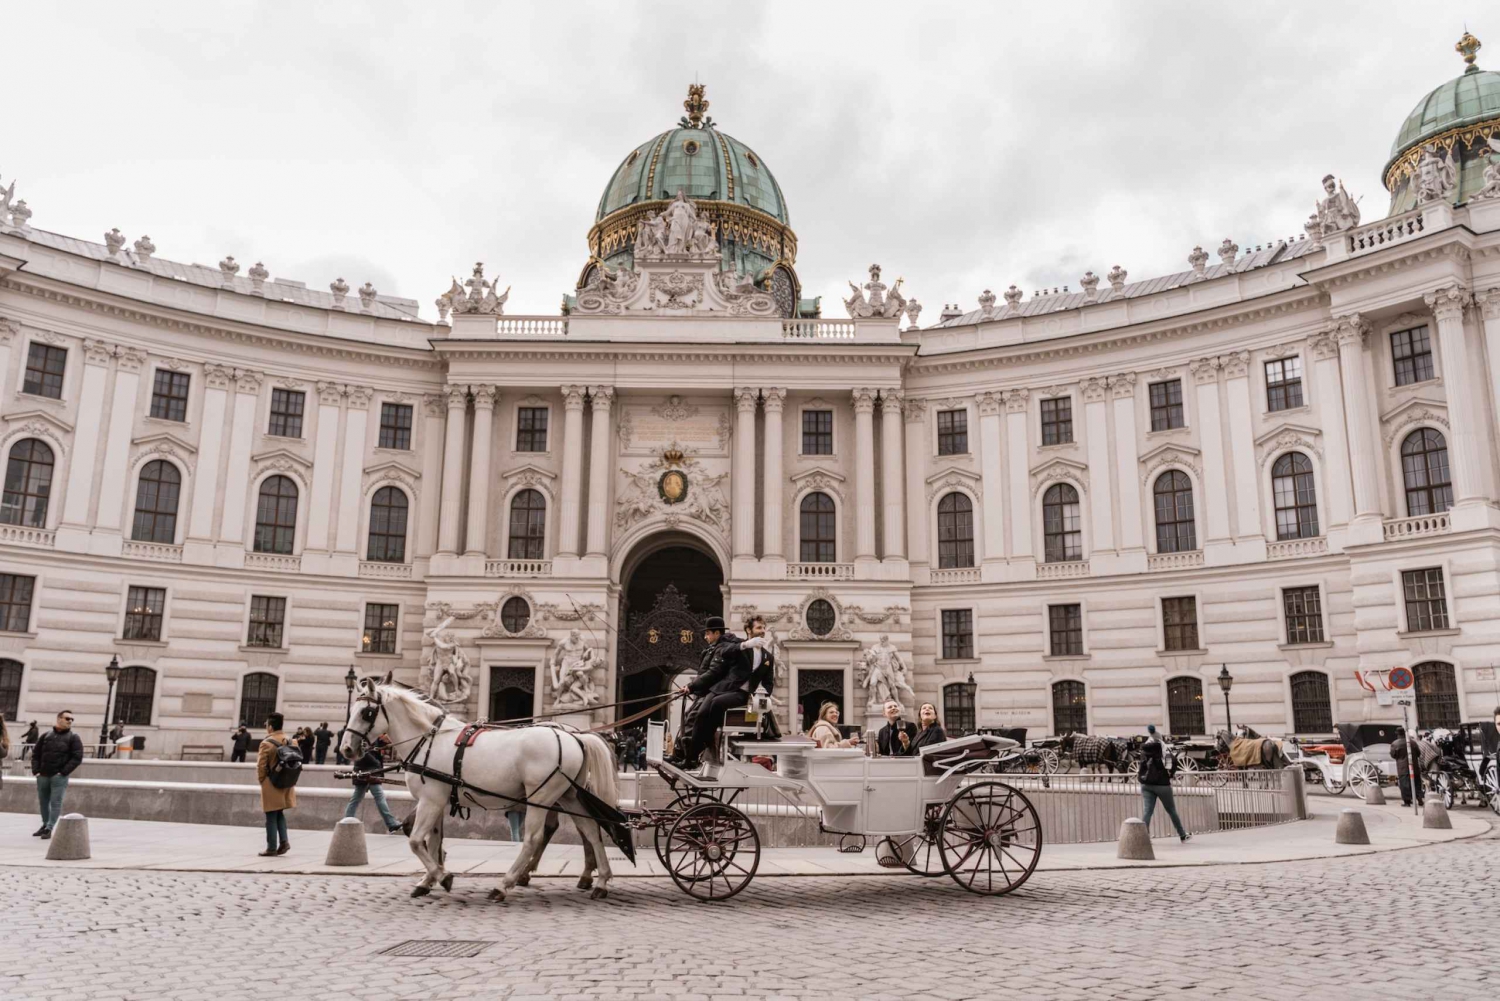 Take-a-Horse-Drawn-Carriage-Ride-around-the-Ringstrasse